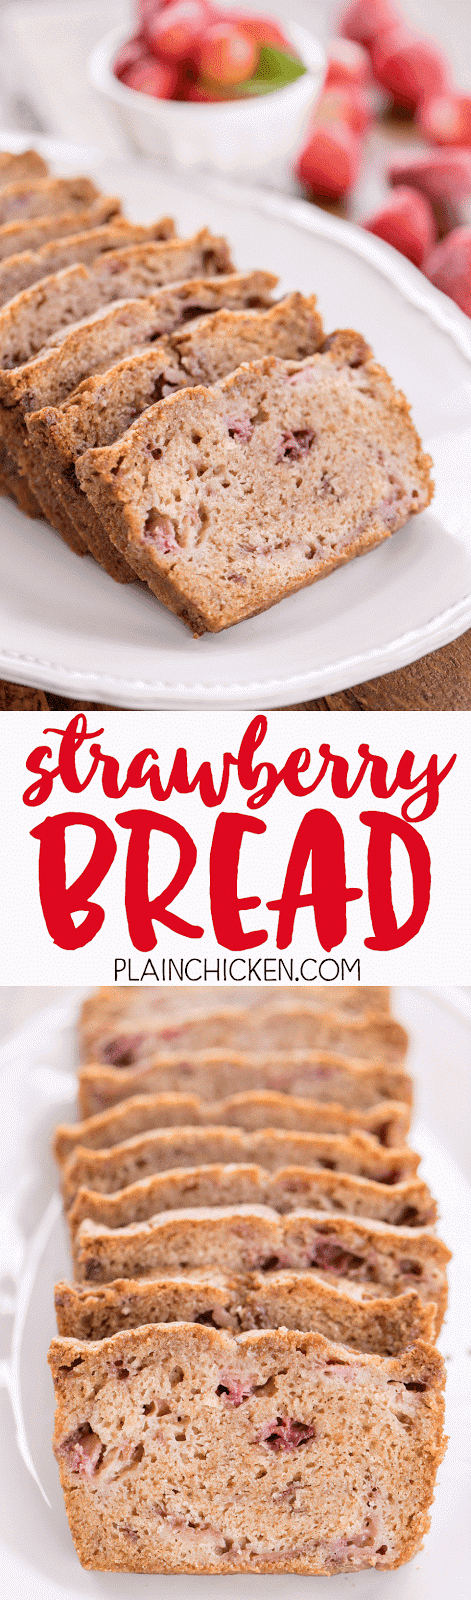 Strawberry Bread - a wonderful way to use up all those yummy summer strawberries. Ready for the oven in minutes! Flour, sugar, baking soda, salt, cinnamon, eggs, oil and strawberries. Freezes well too!